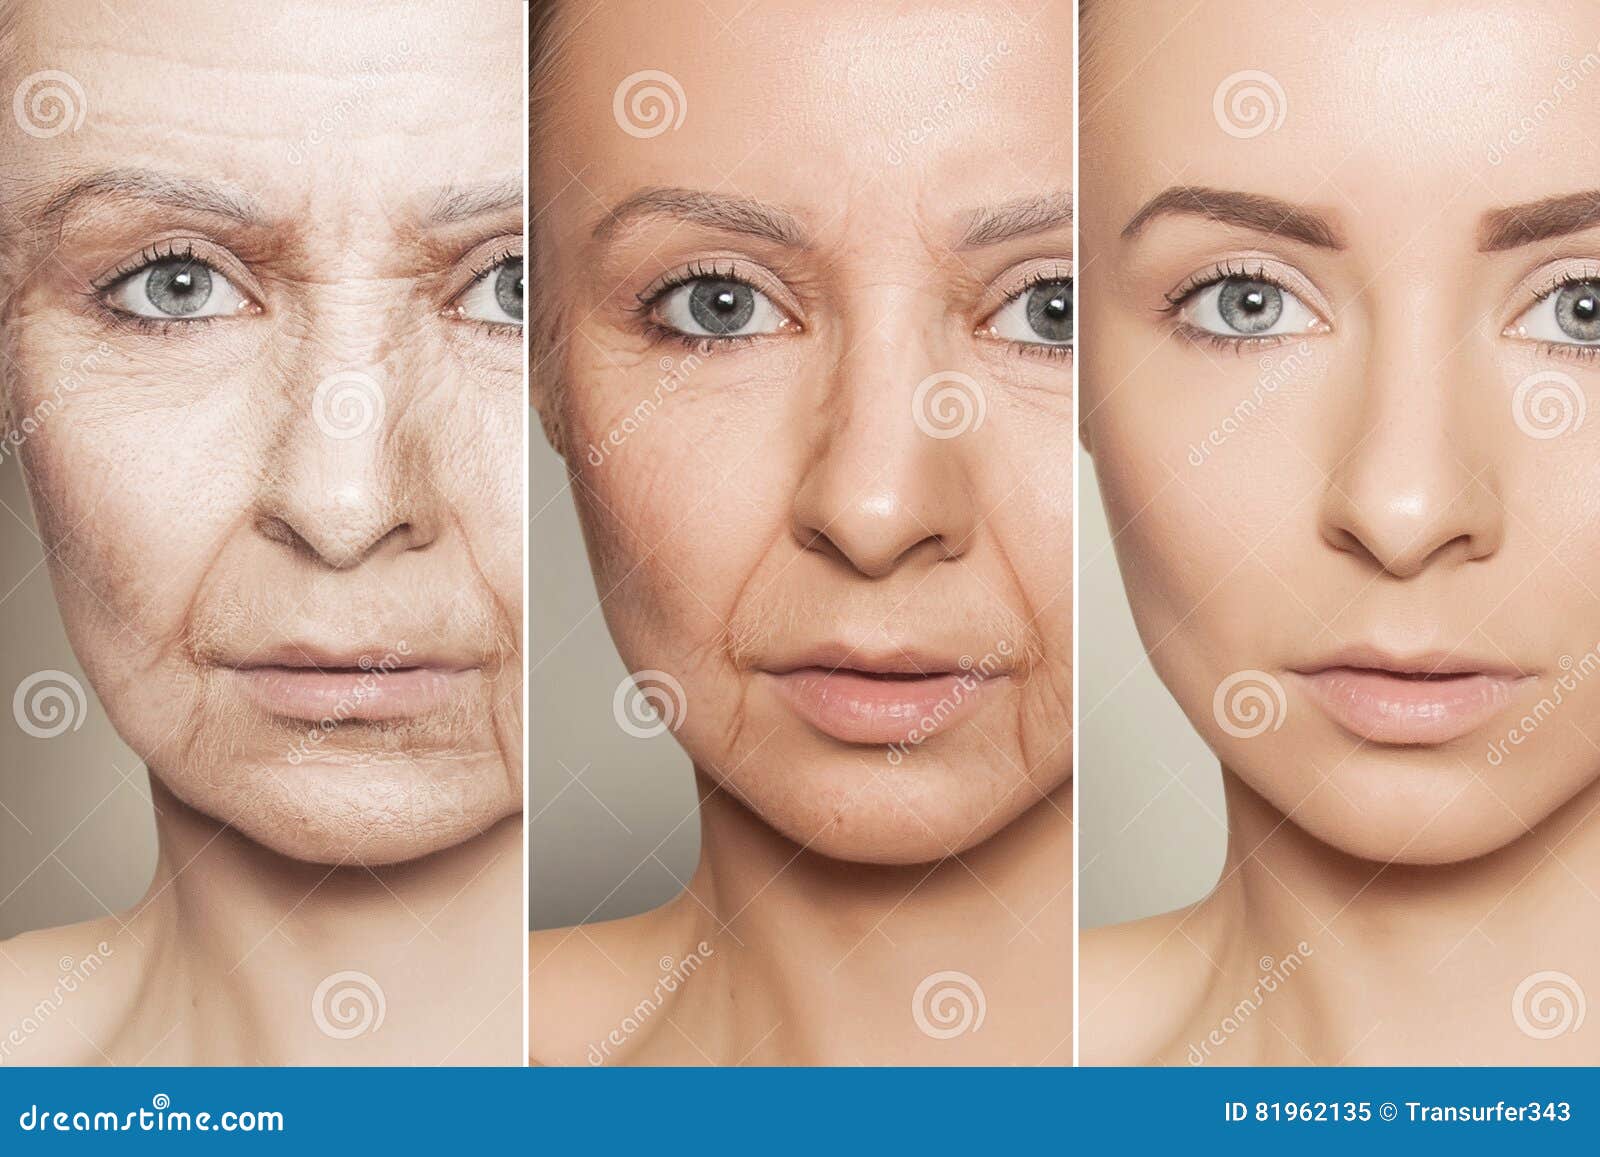 Anti Aging Show - Health/Beauty | Facebook